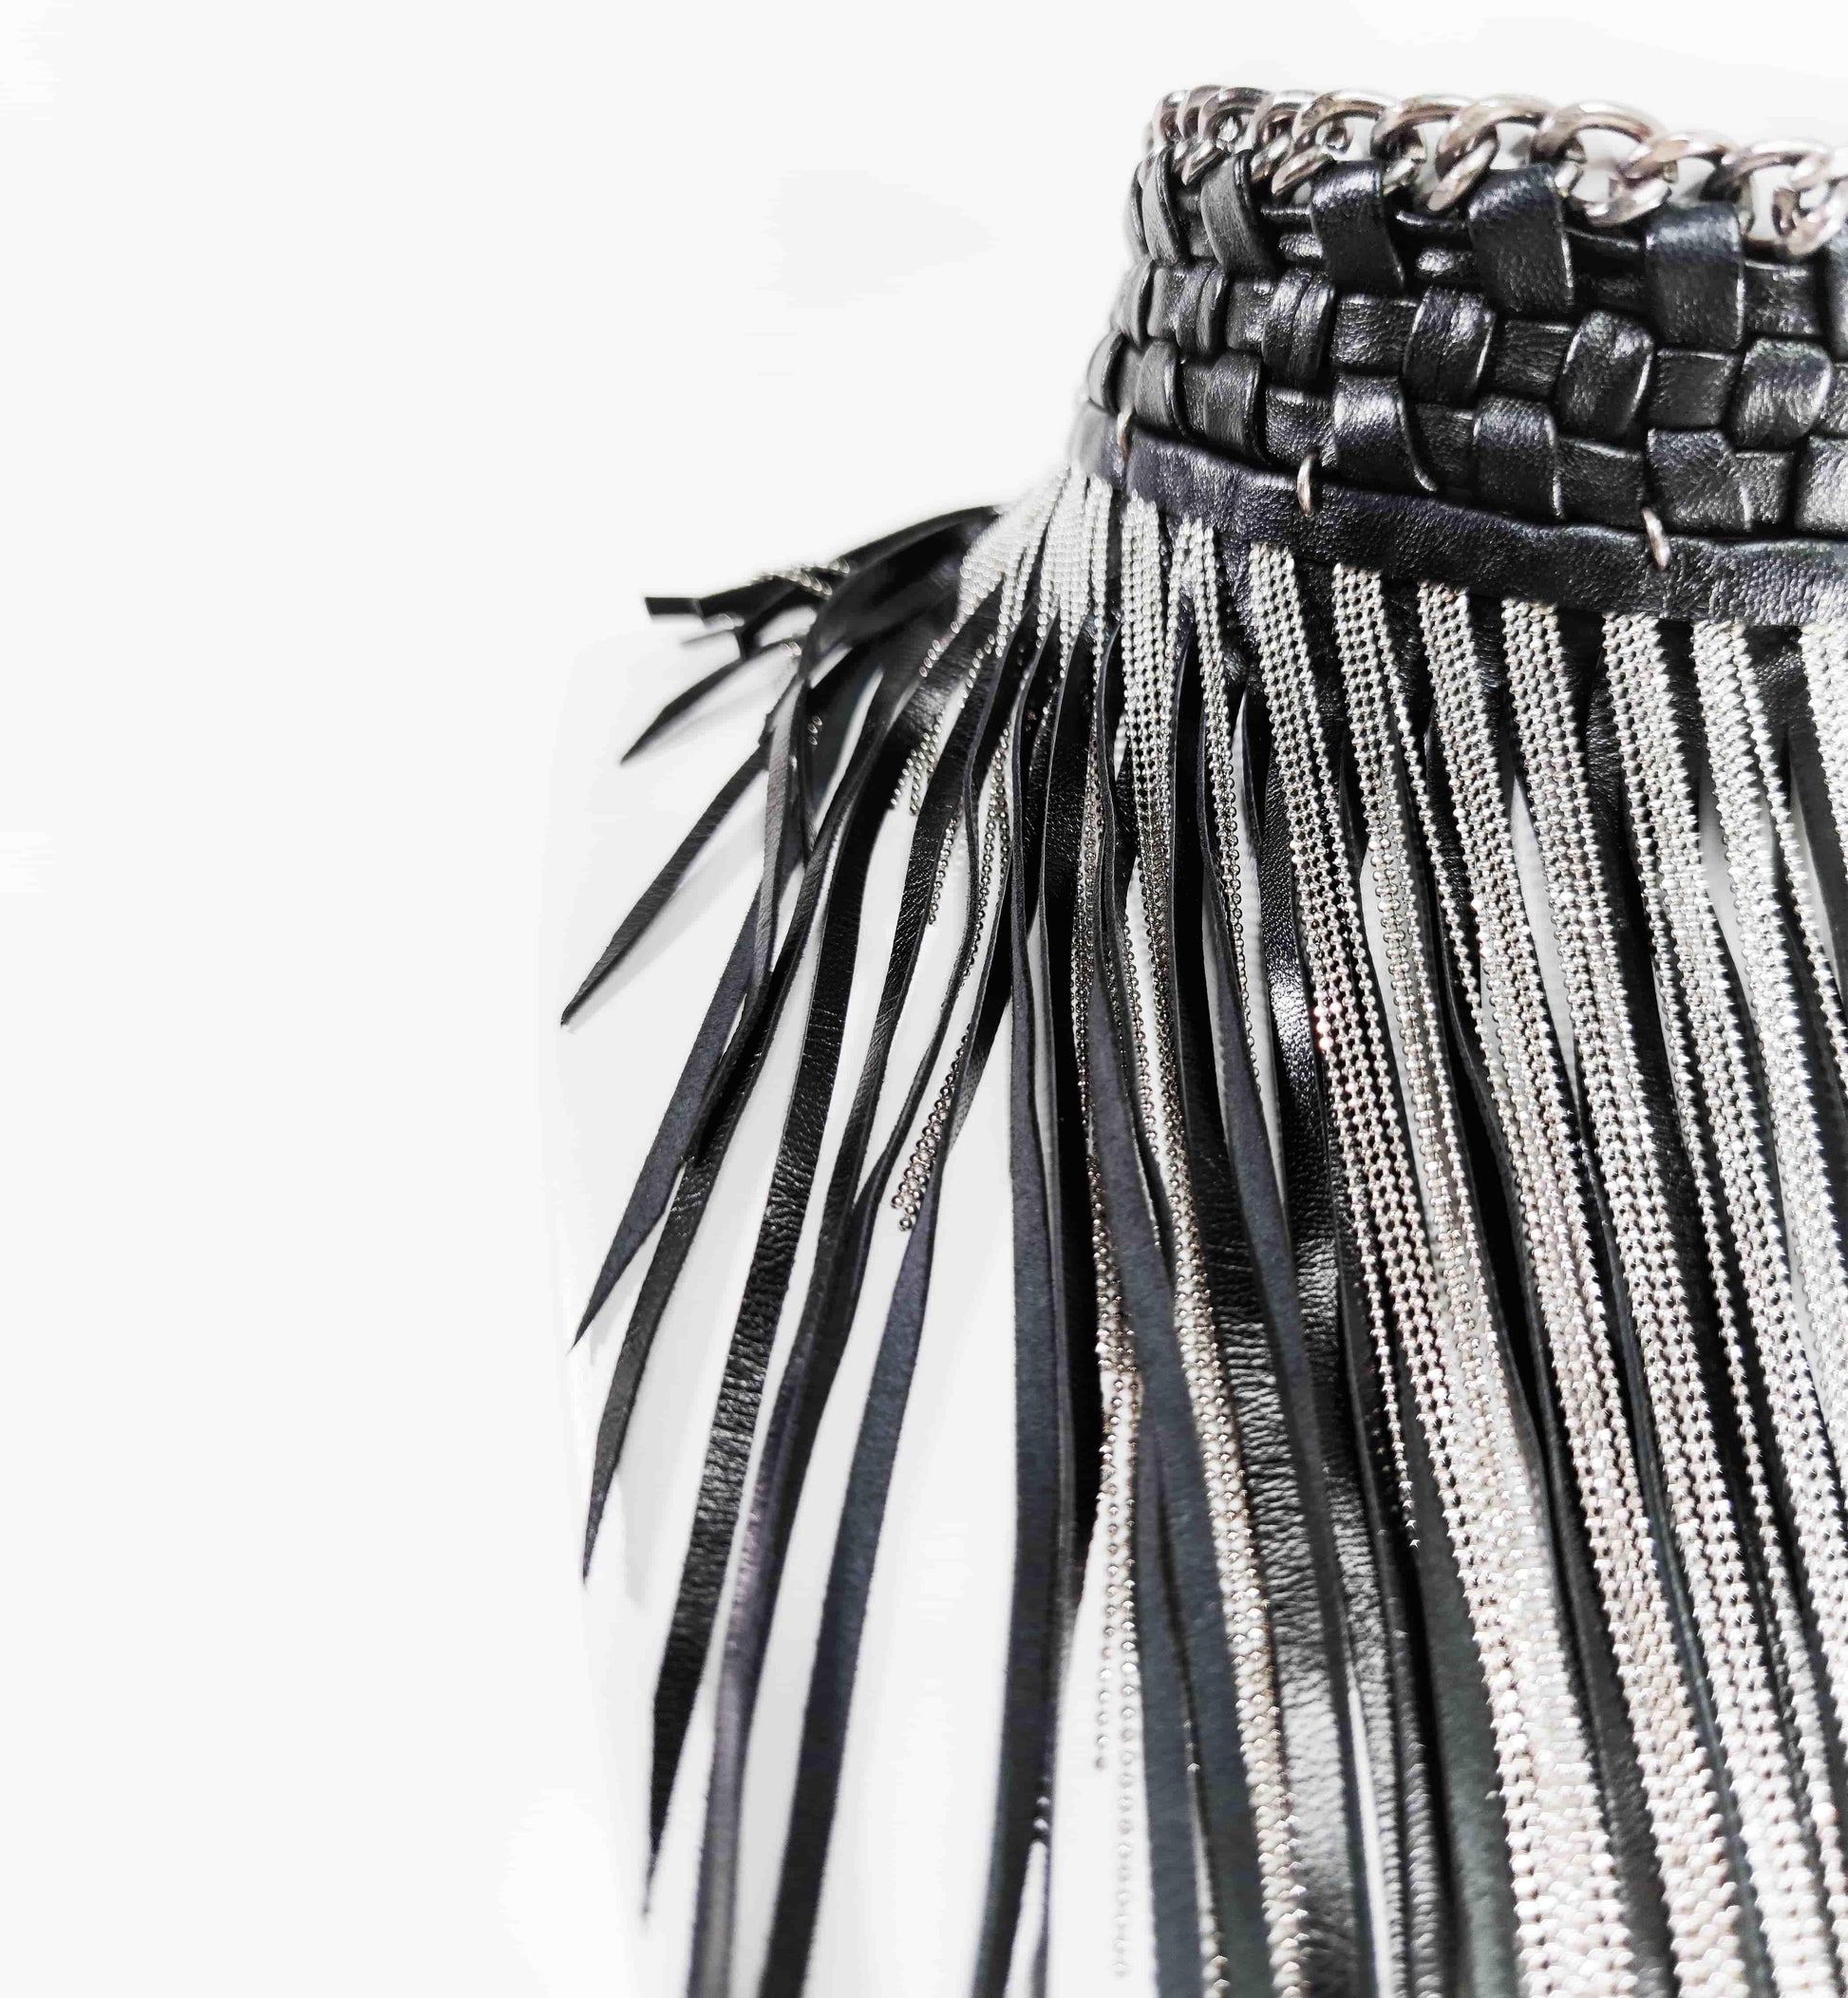 Exquisite detail of Long Braided Leather Chocker with Leather Fringe and Chains showcasing the fine craftsmanship and elegant design characteristic of Axinia Collection 's luxury collection.